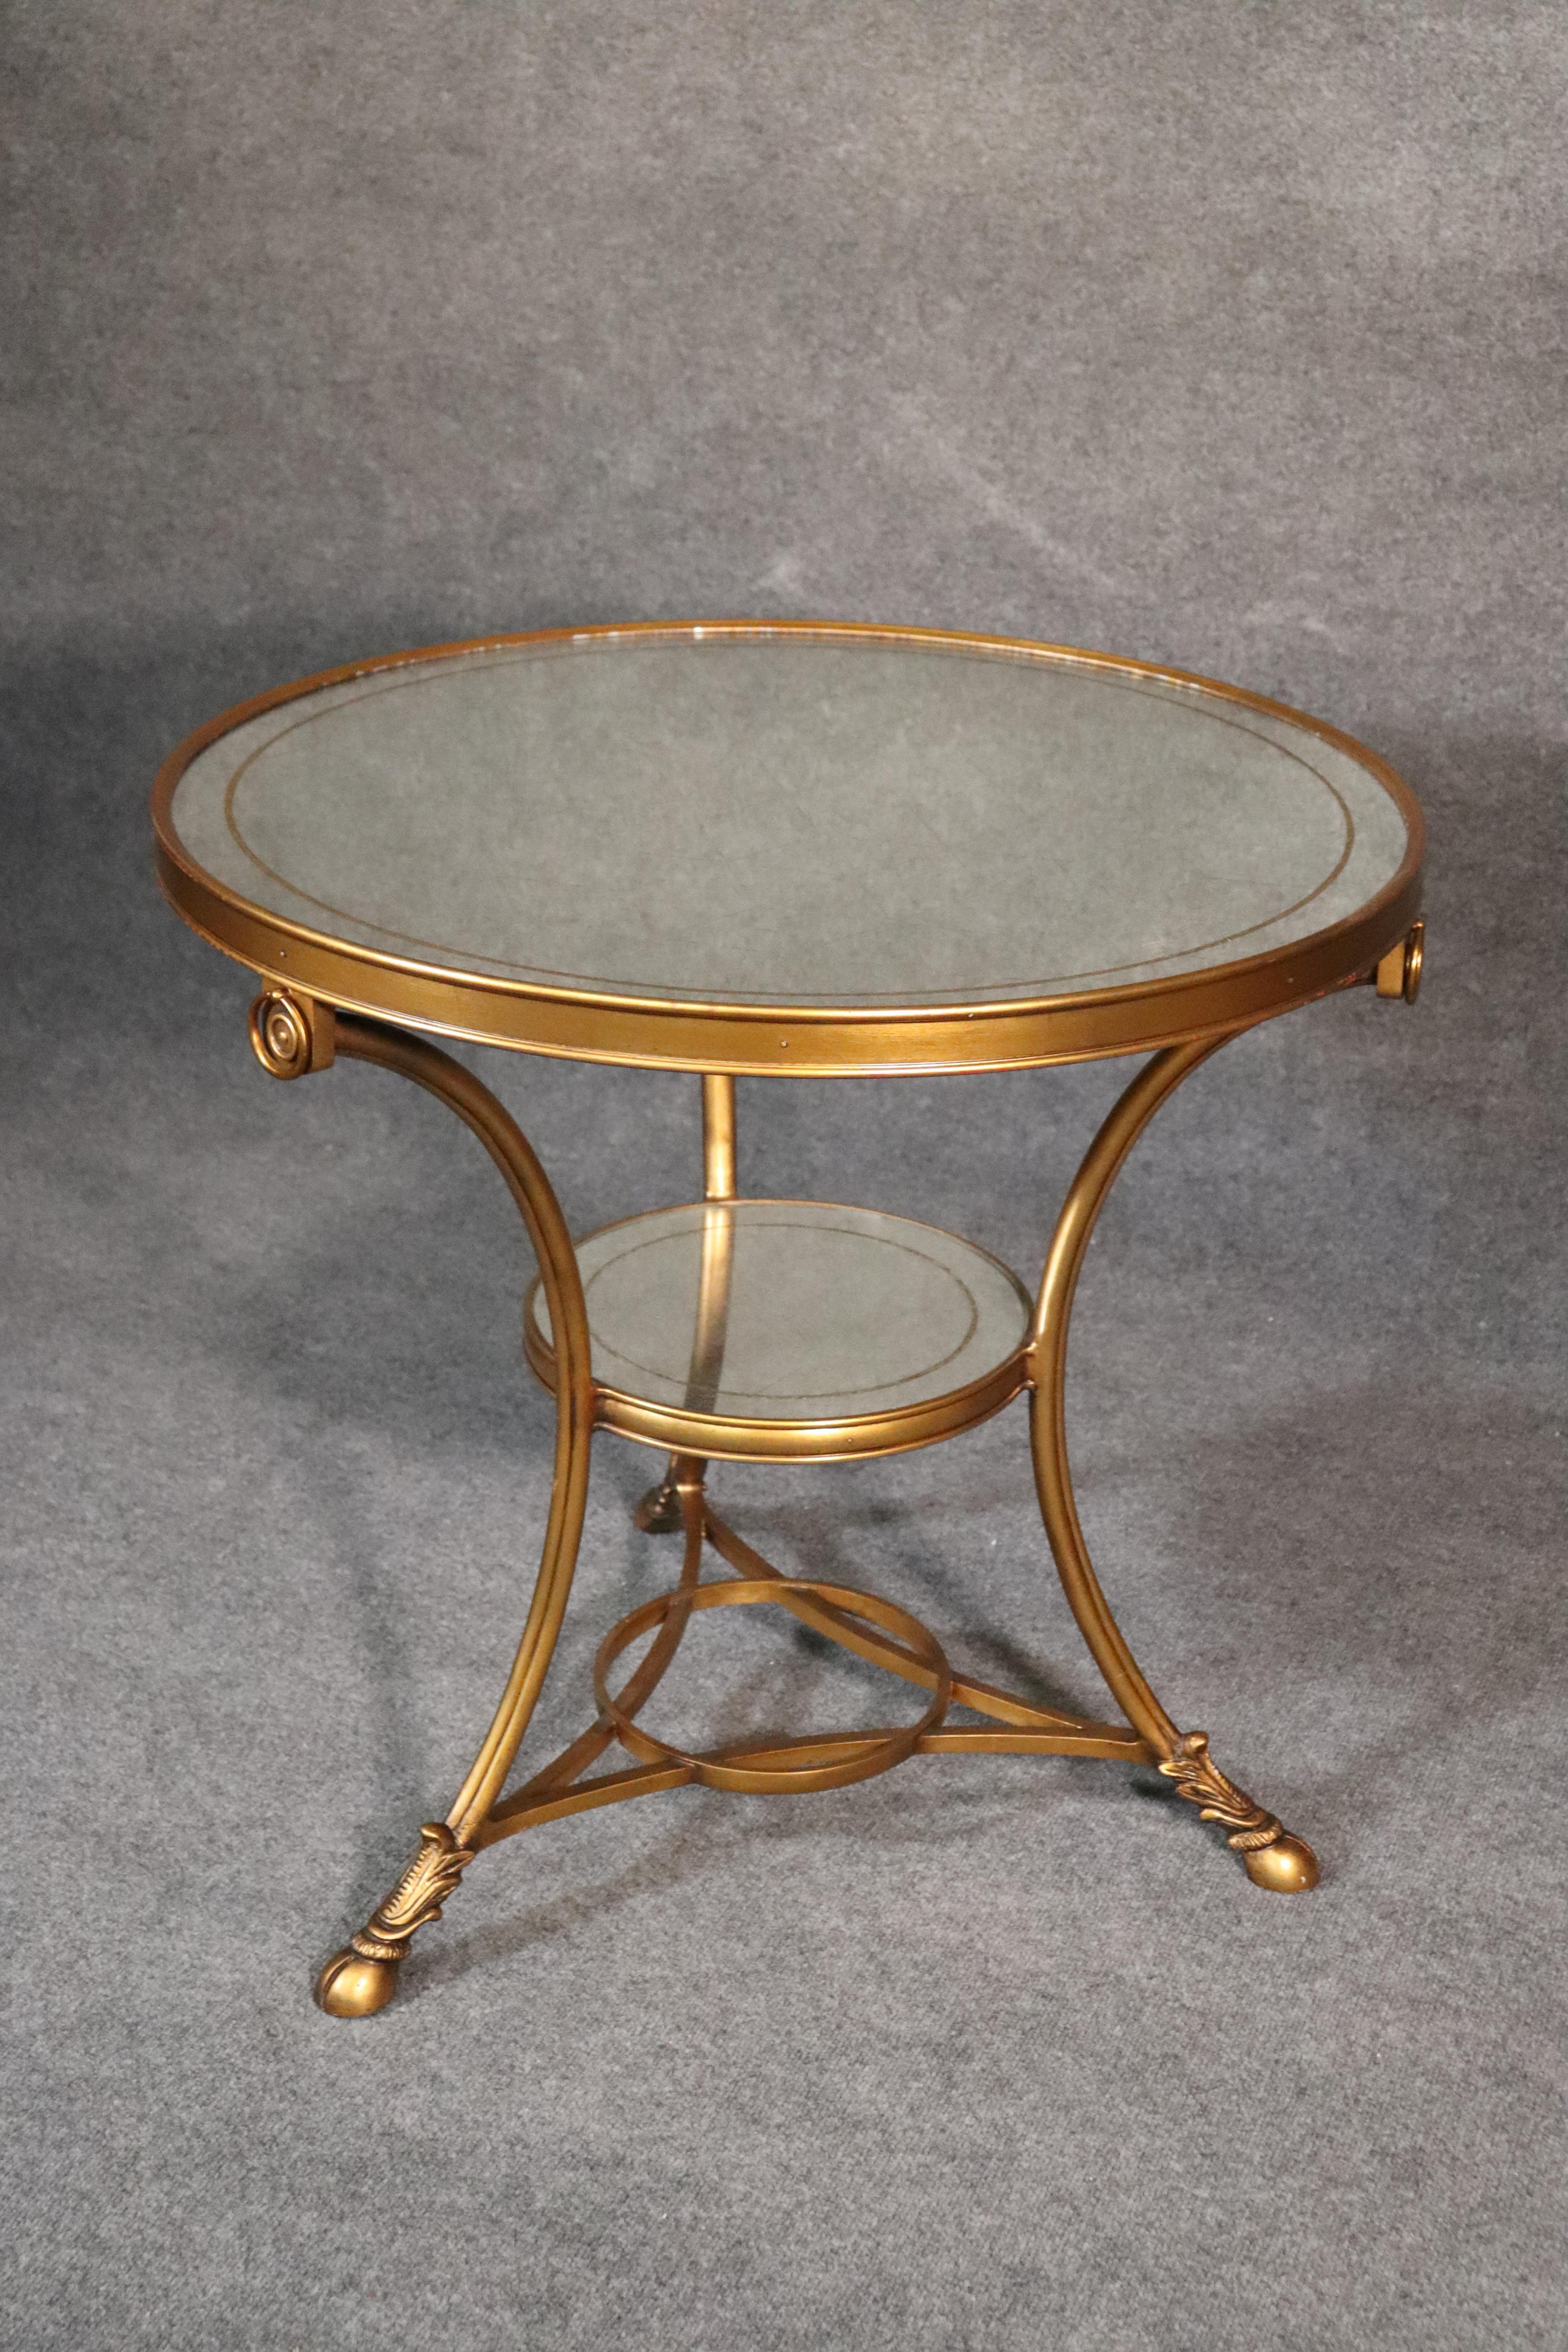 This is a fantastic gilded and silver leafed eglomise center table in the French Directoire style. The table has some minor signs of age that are mostly contained as small losses of gold surrounding the table top perimeter. The table has a gorgeous